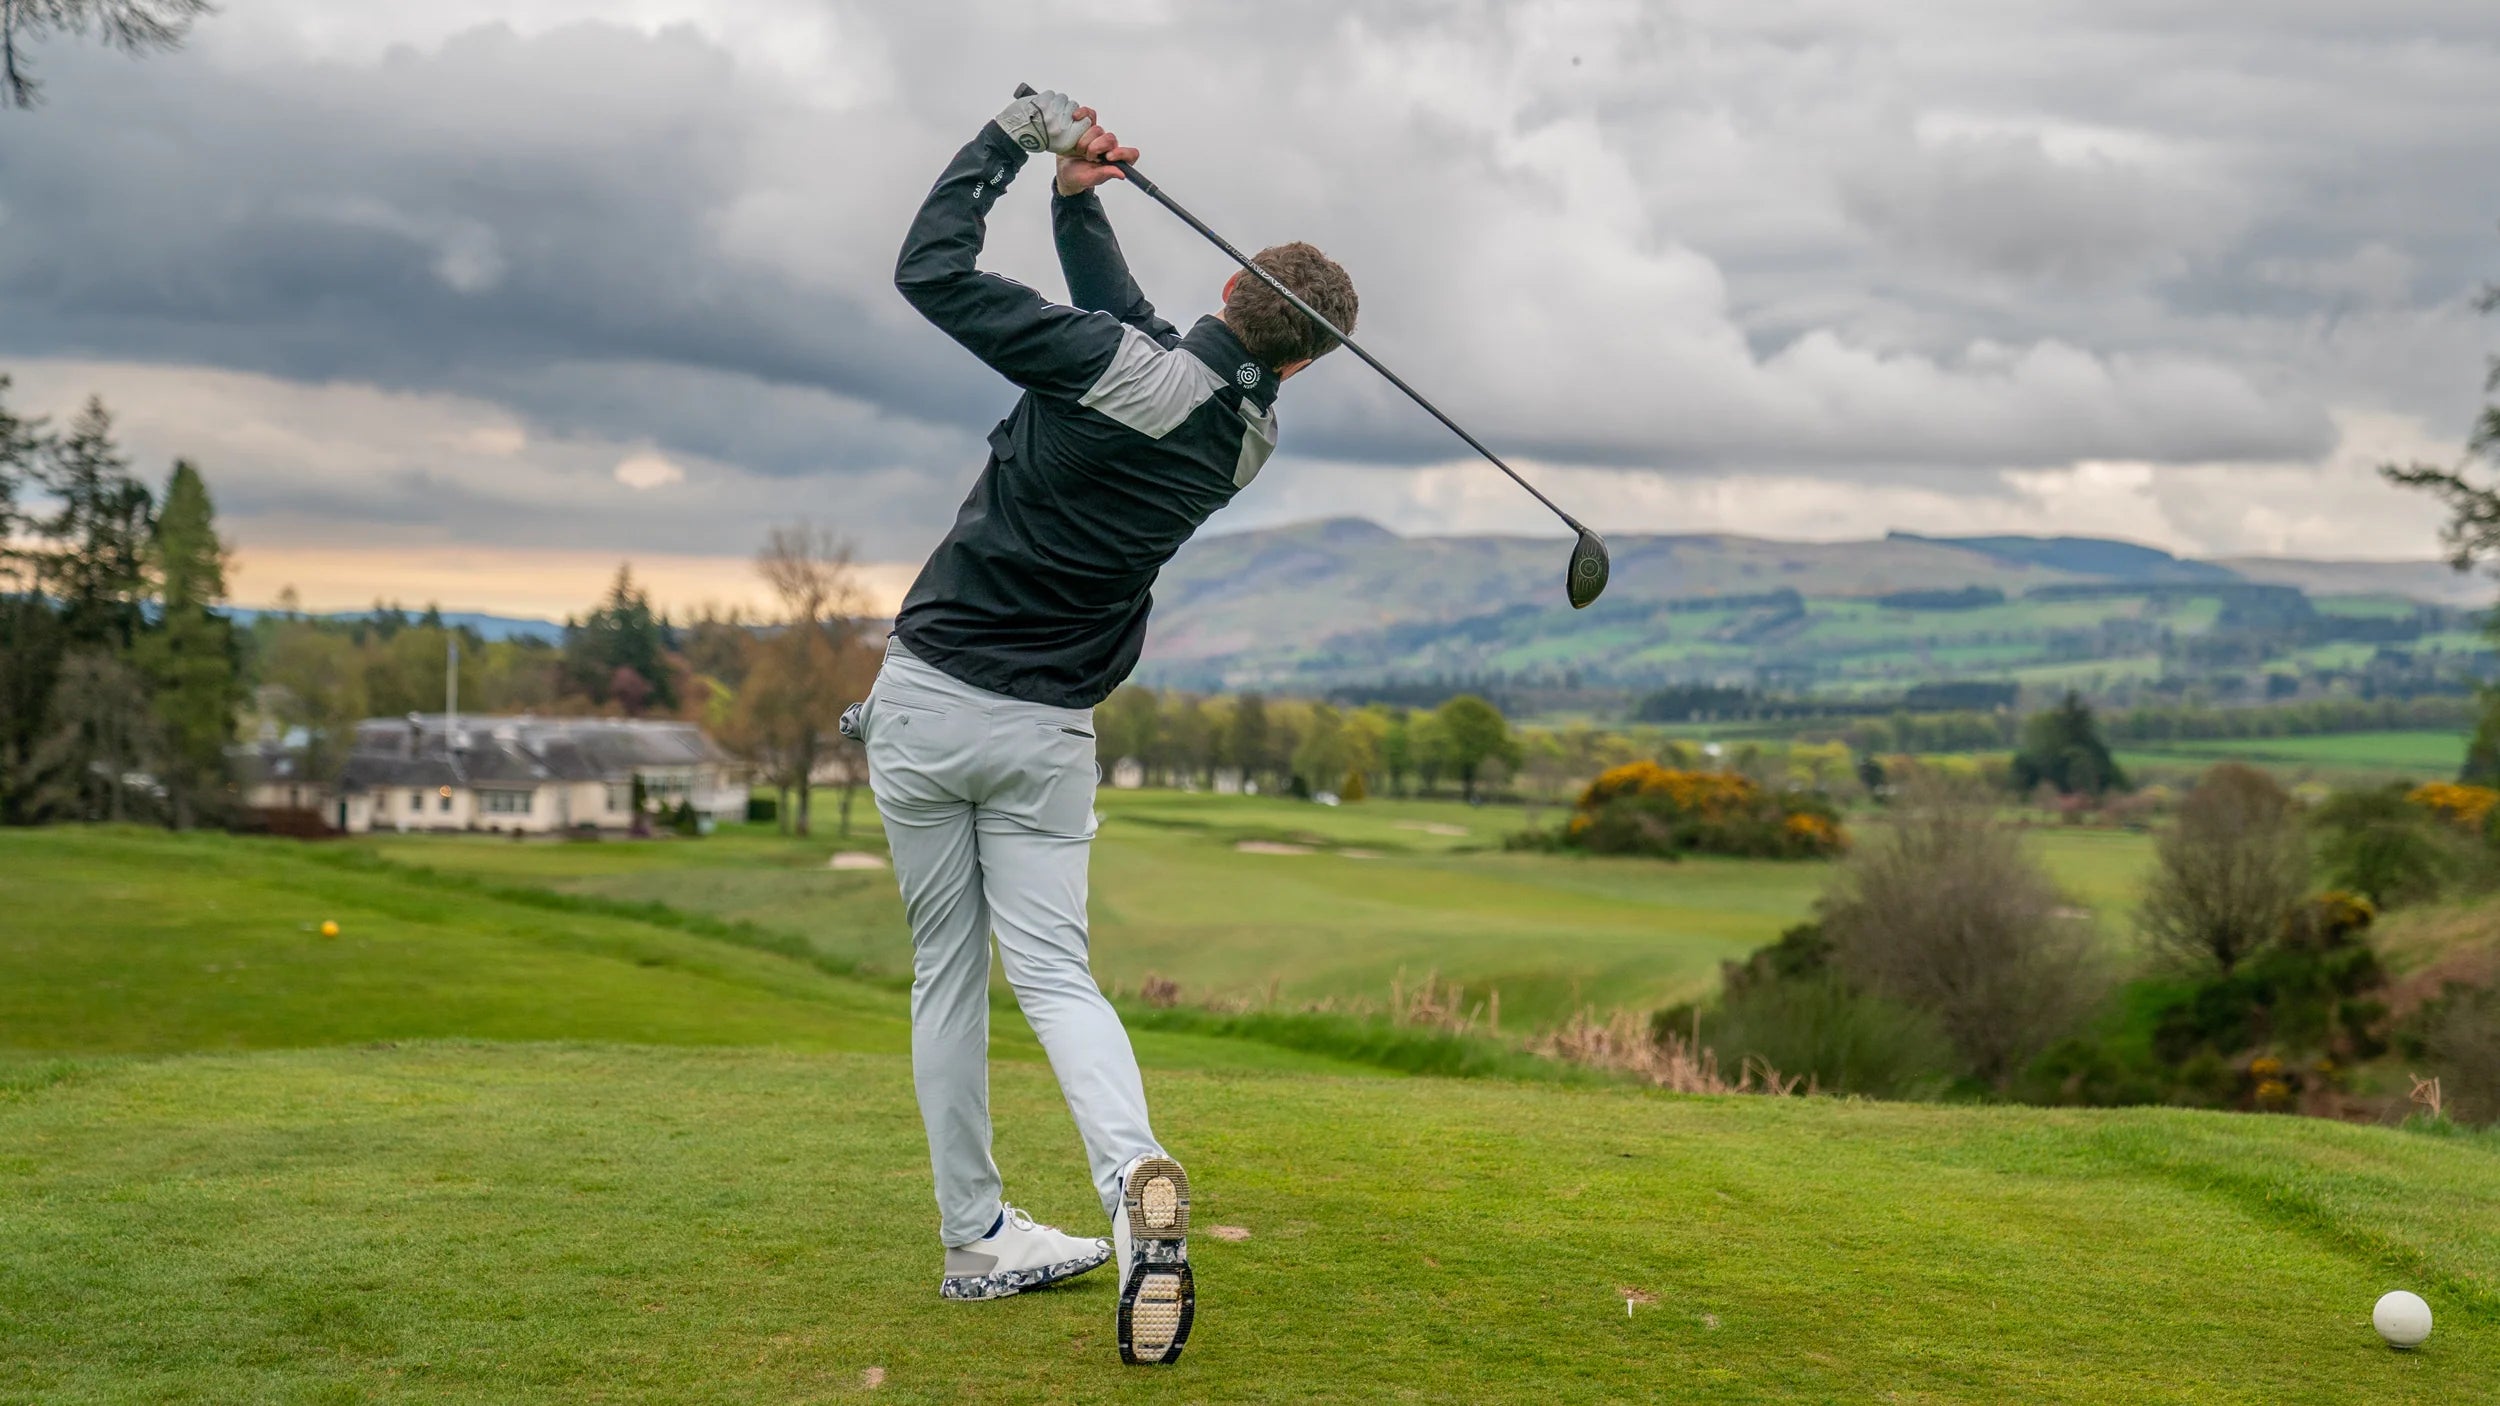 10 tips for improving your golf swing